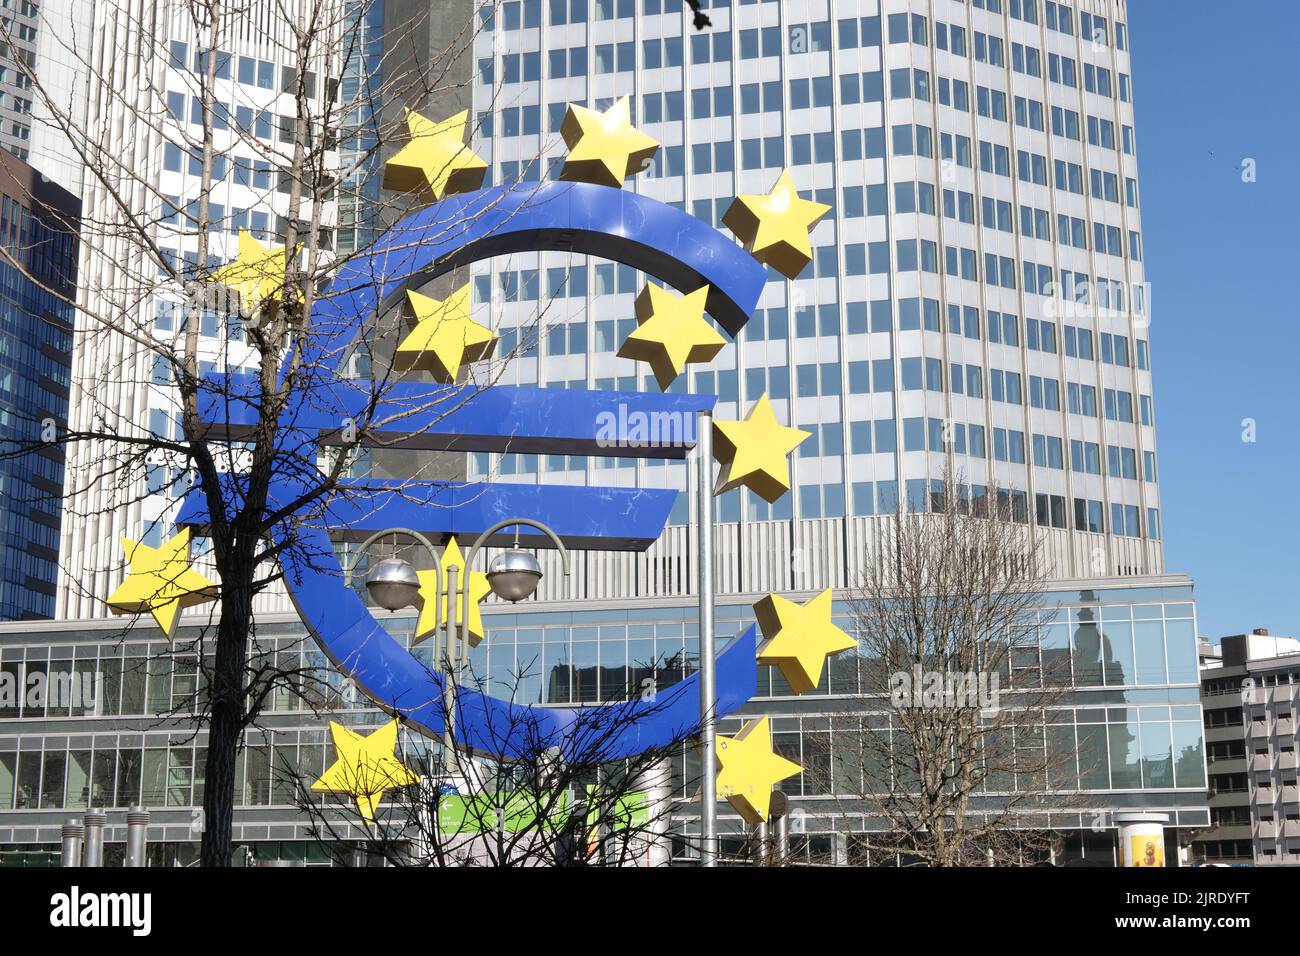 The Euro sign in front of the central bank building in Frankfurt am Main, Germany Stock Photo